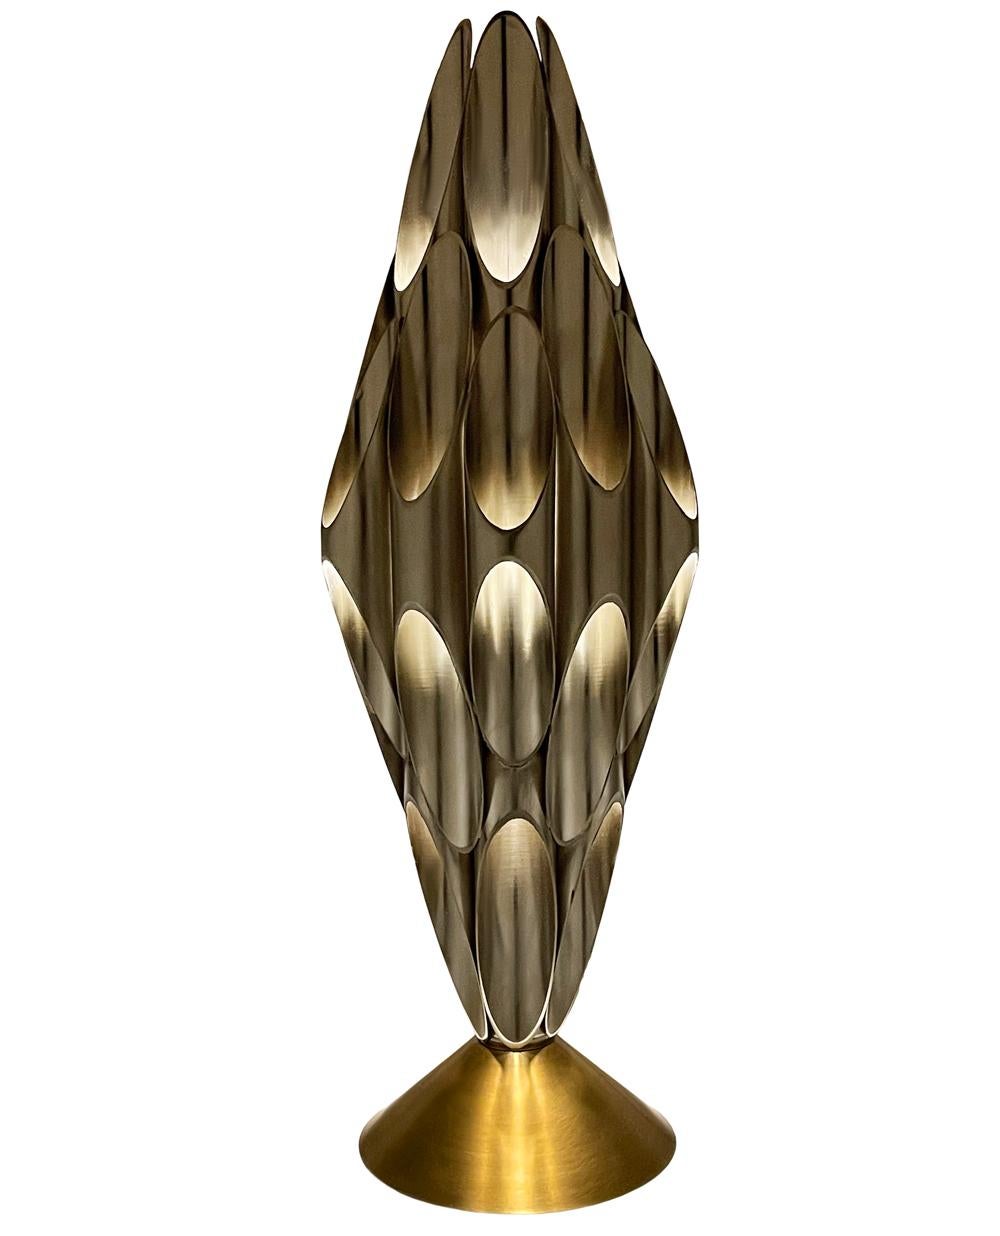 Contemporary Mid-Century Modern Tubular Table Sculpture Lamp in Brass & White After Rougier For Sale